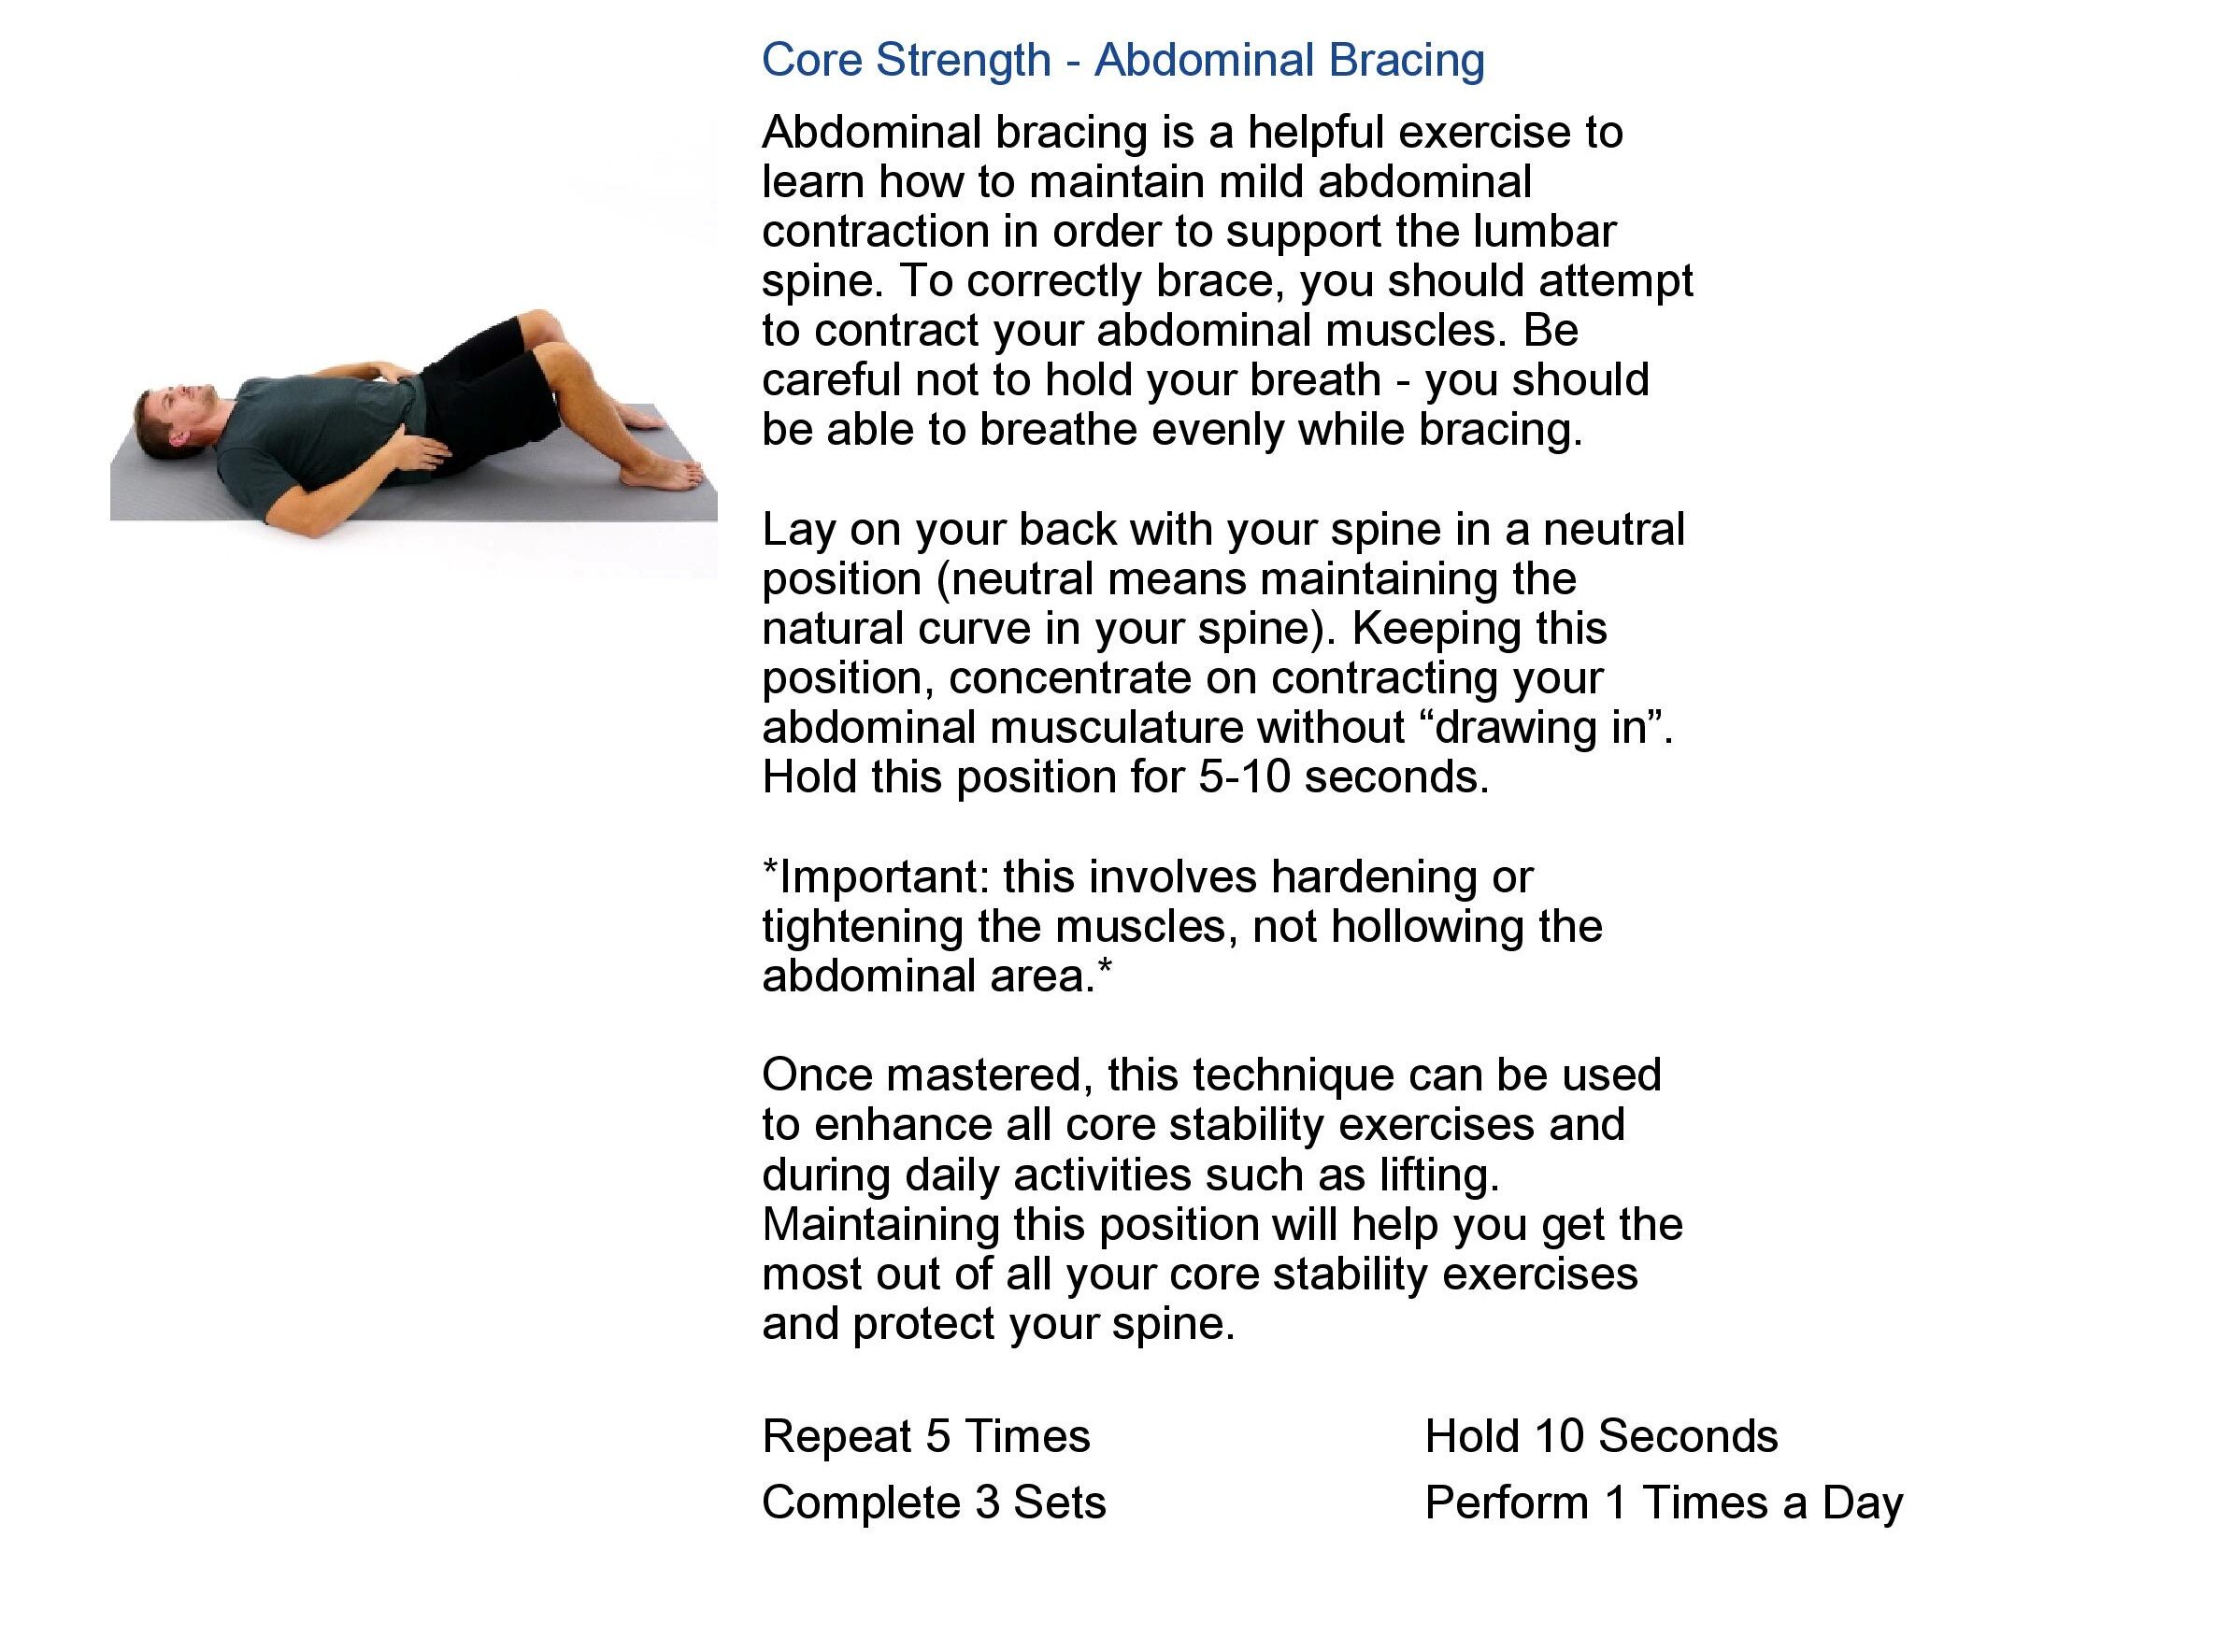 Strengthen Your Core So Your Back's Not Sore - Abdominal Bracing